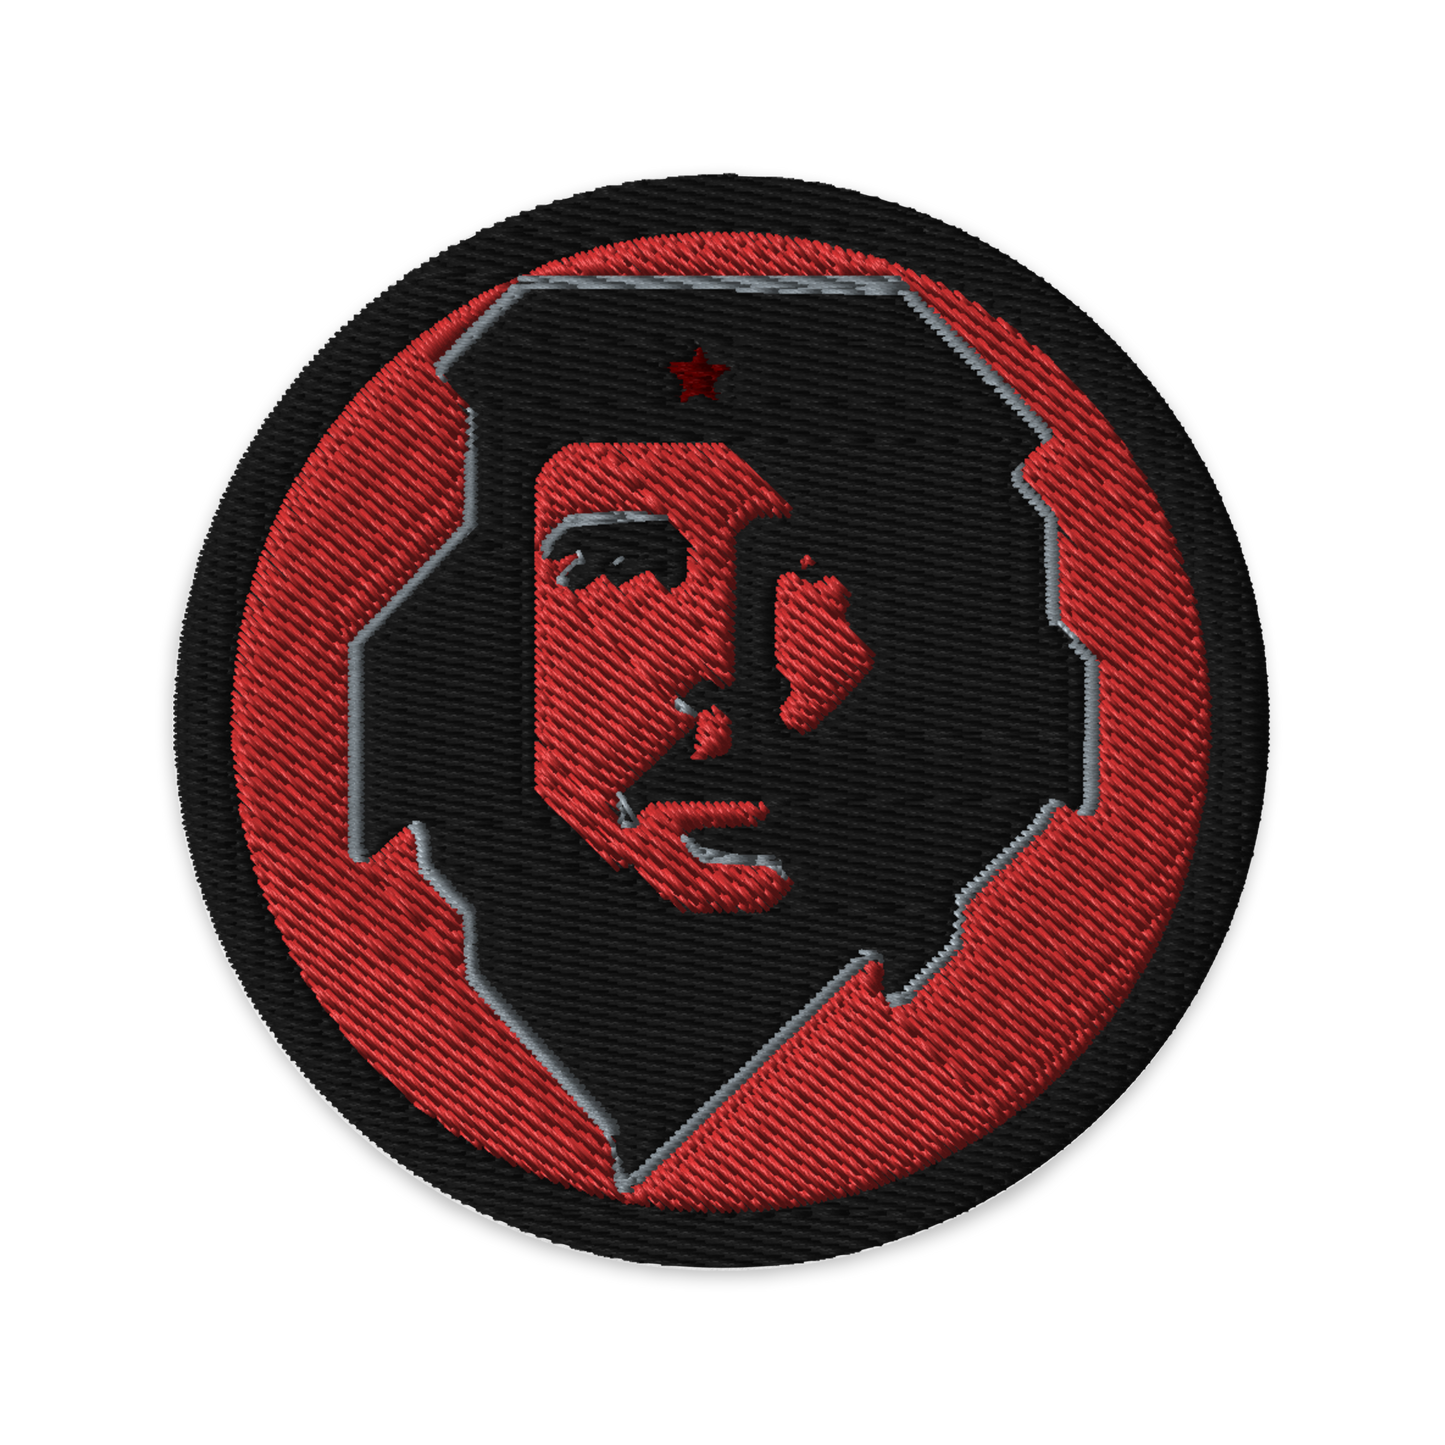 Rebel Patches: The Guevara